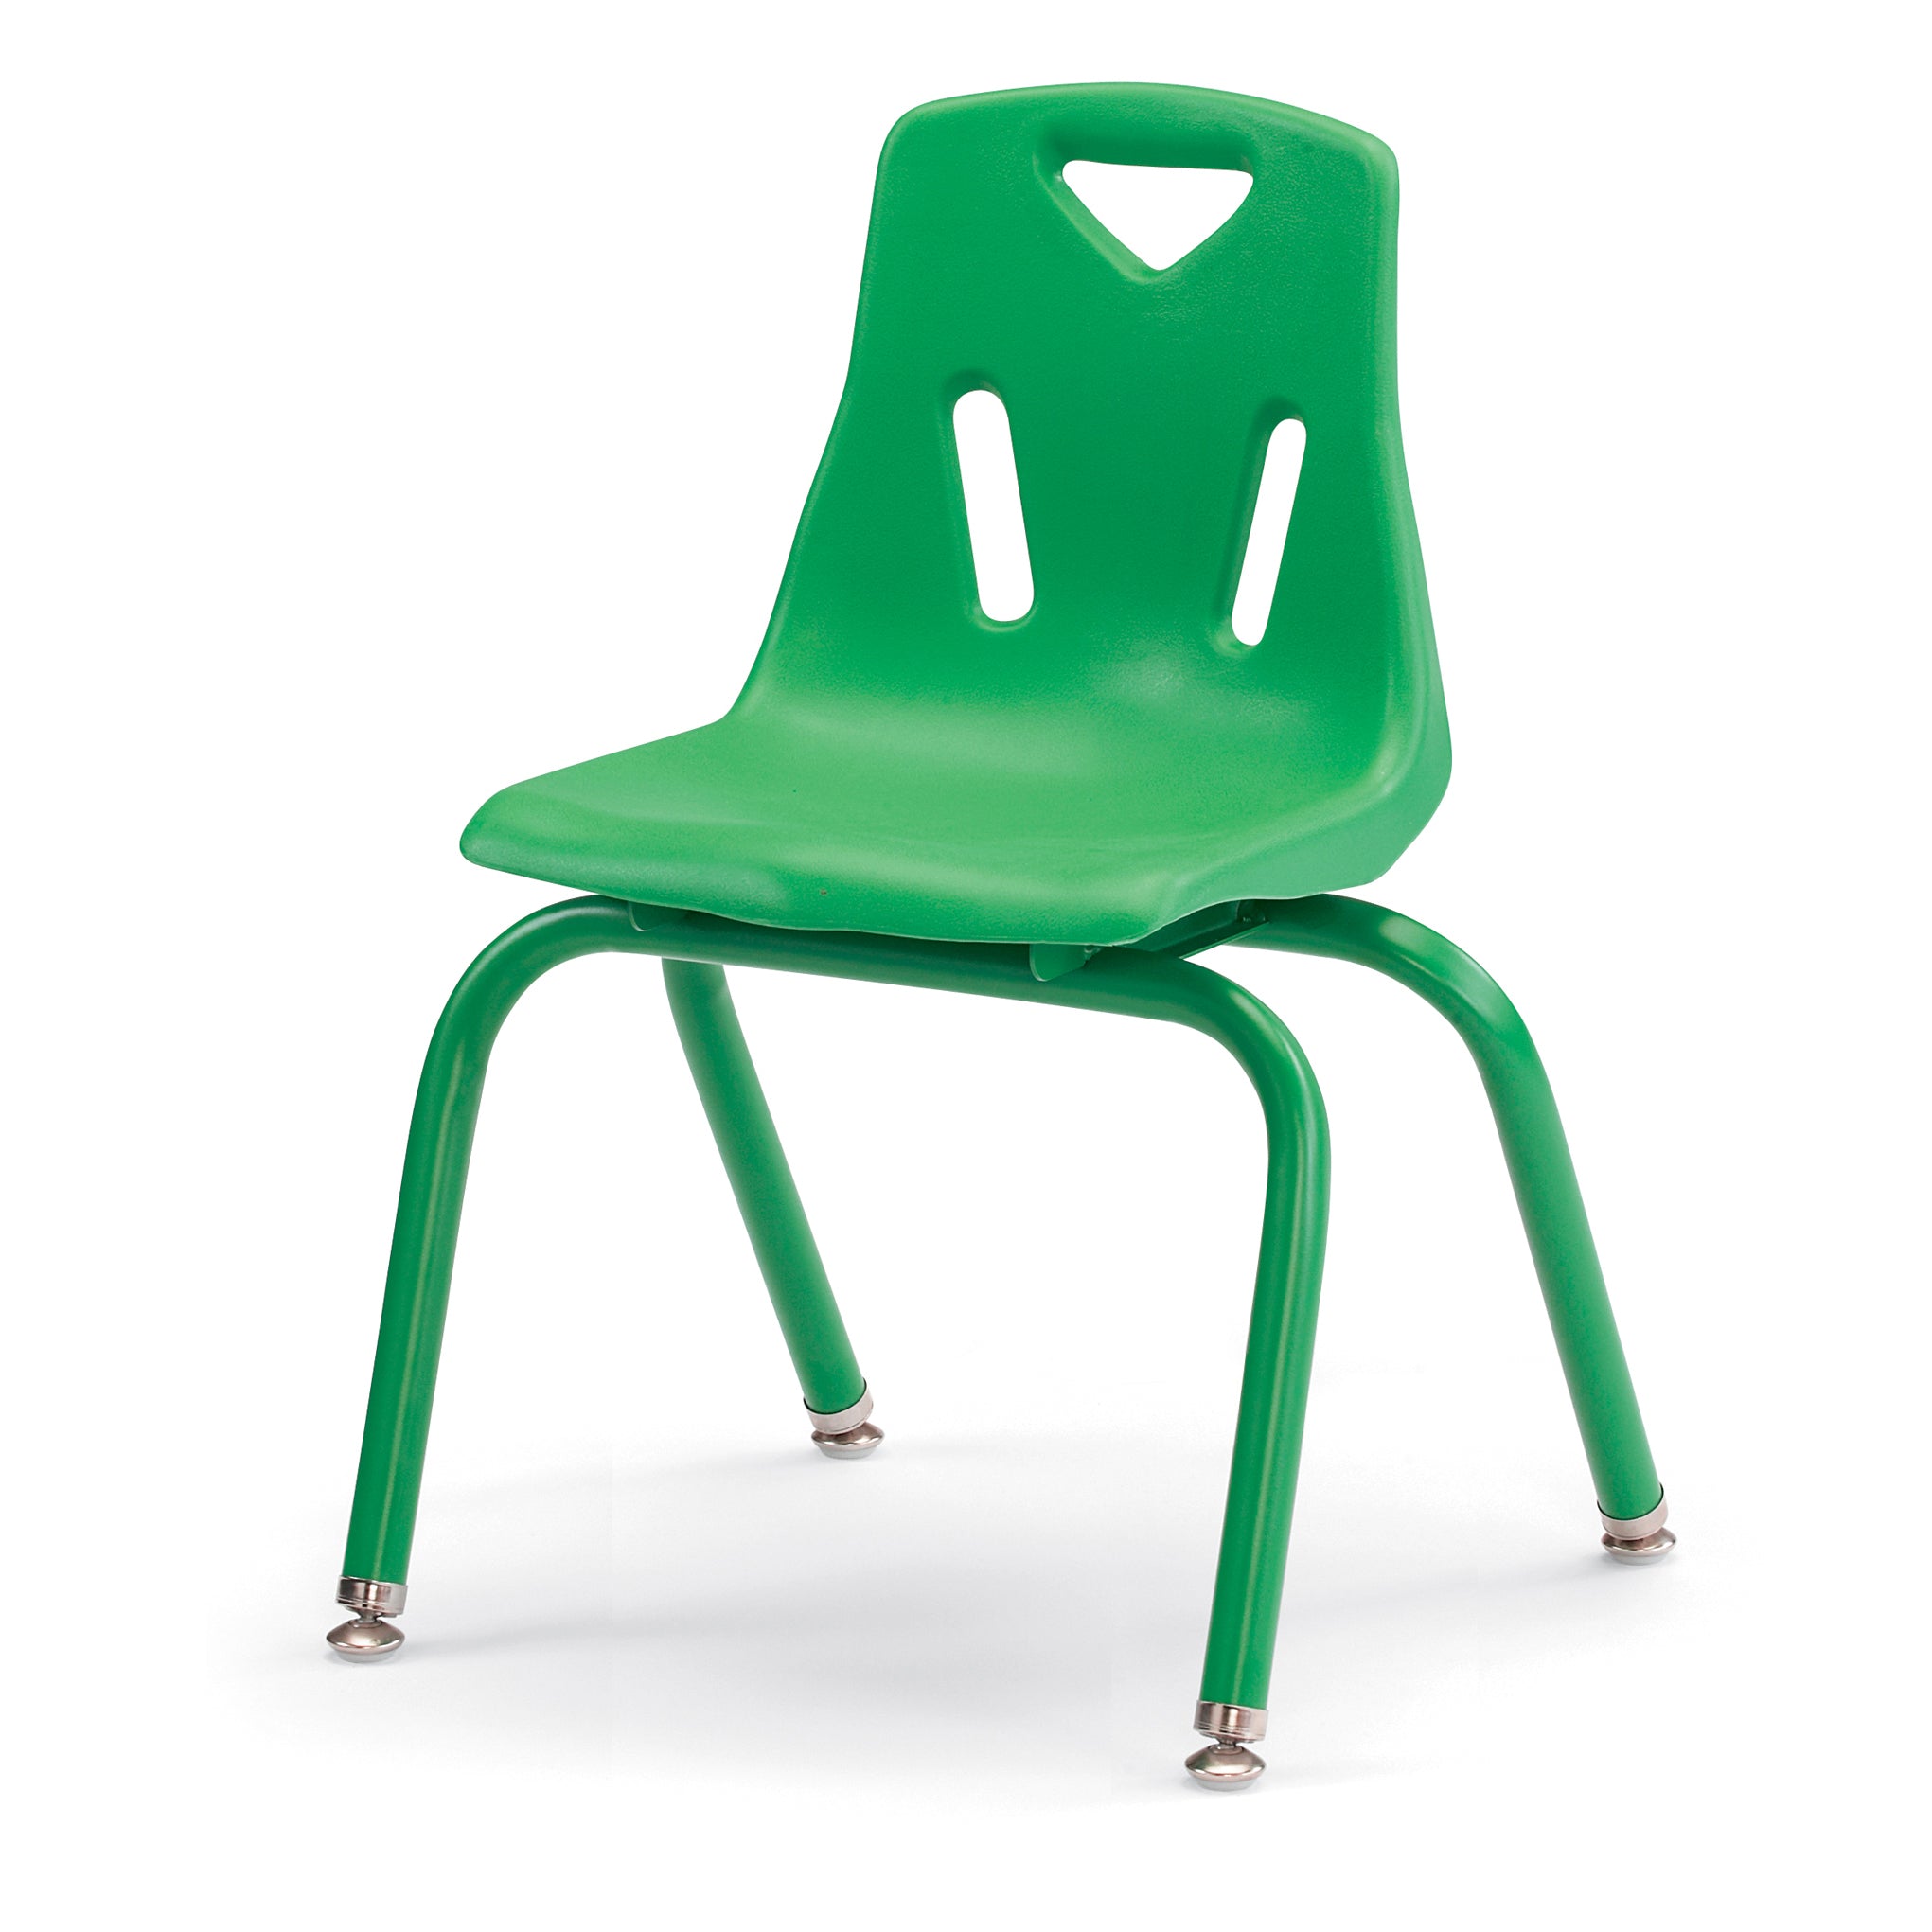 8124JC1119, Berries Stacking Chair with Powder-Coated Legs - 14" Ht - Green